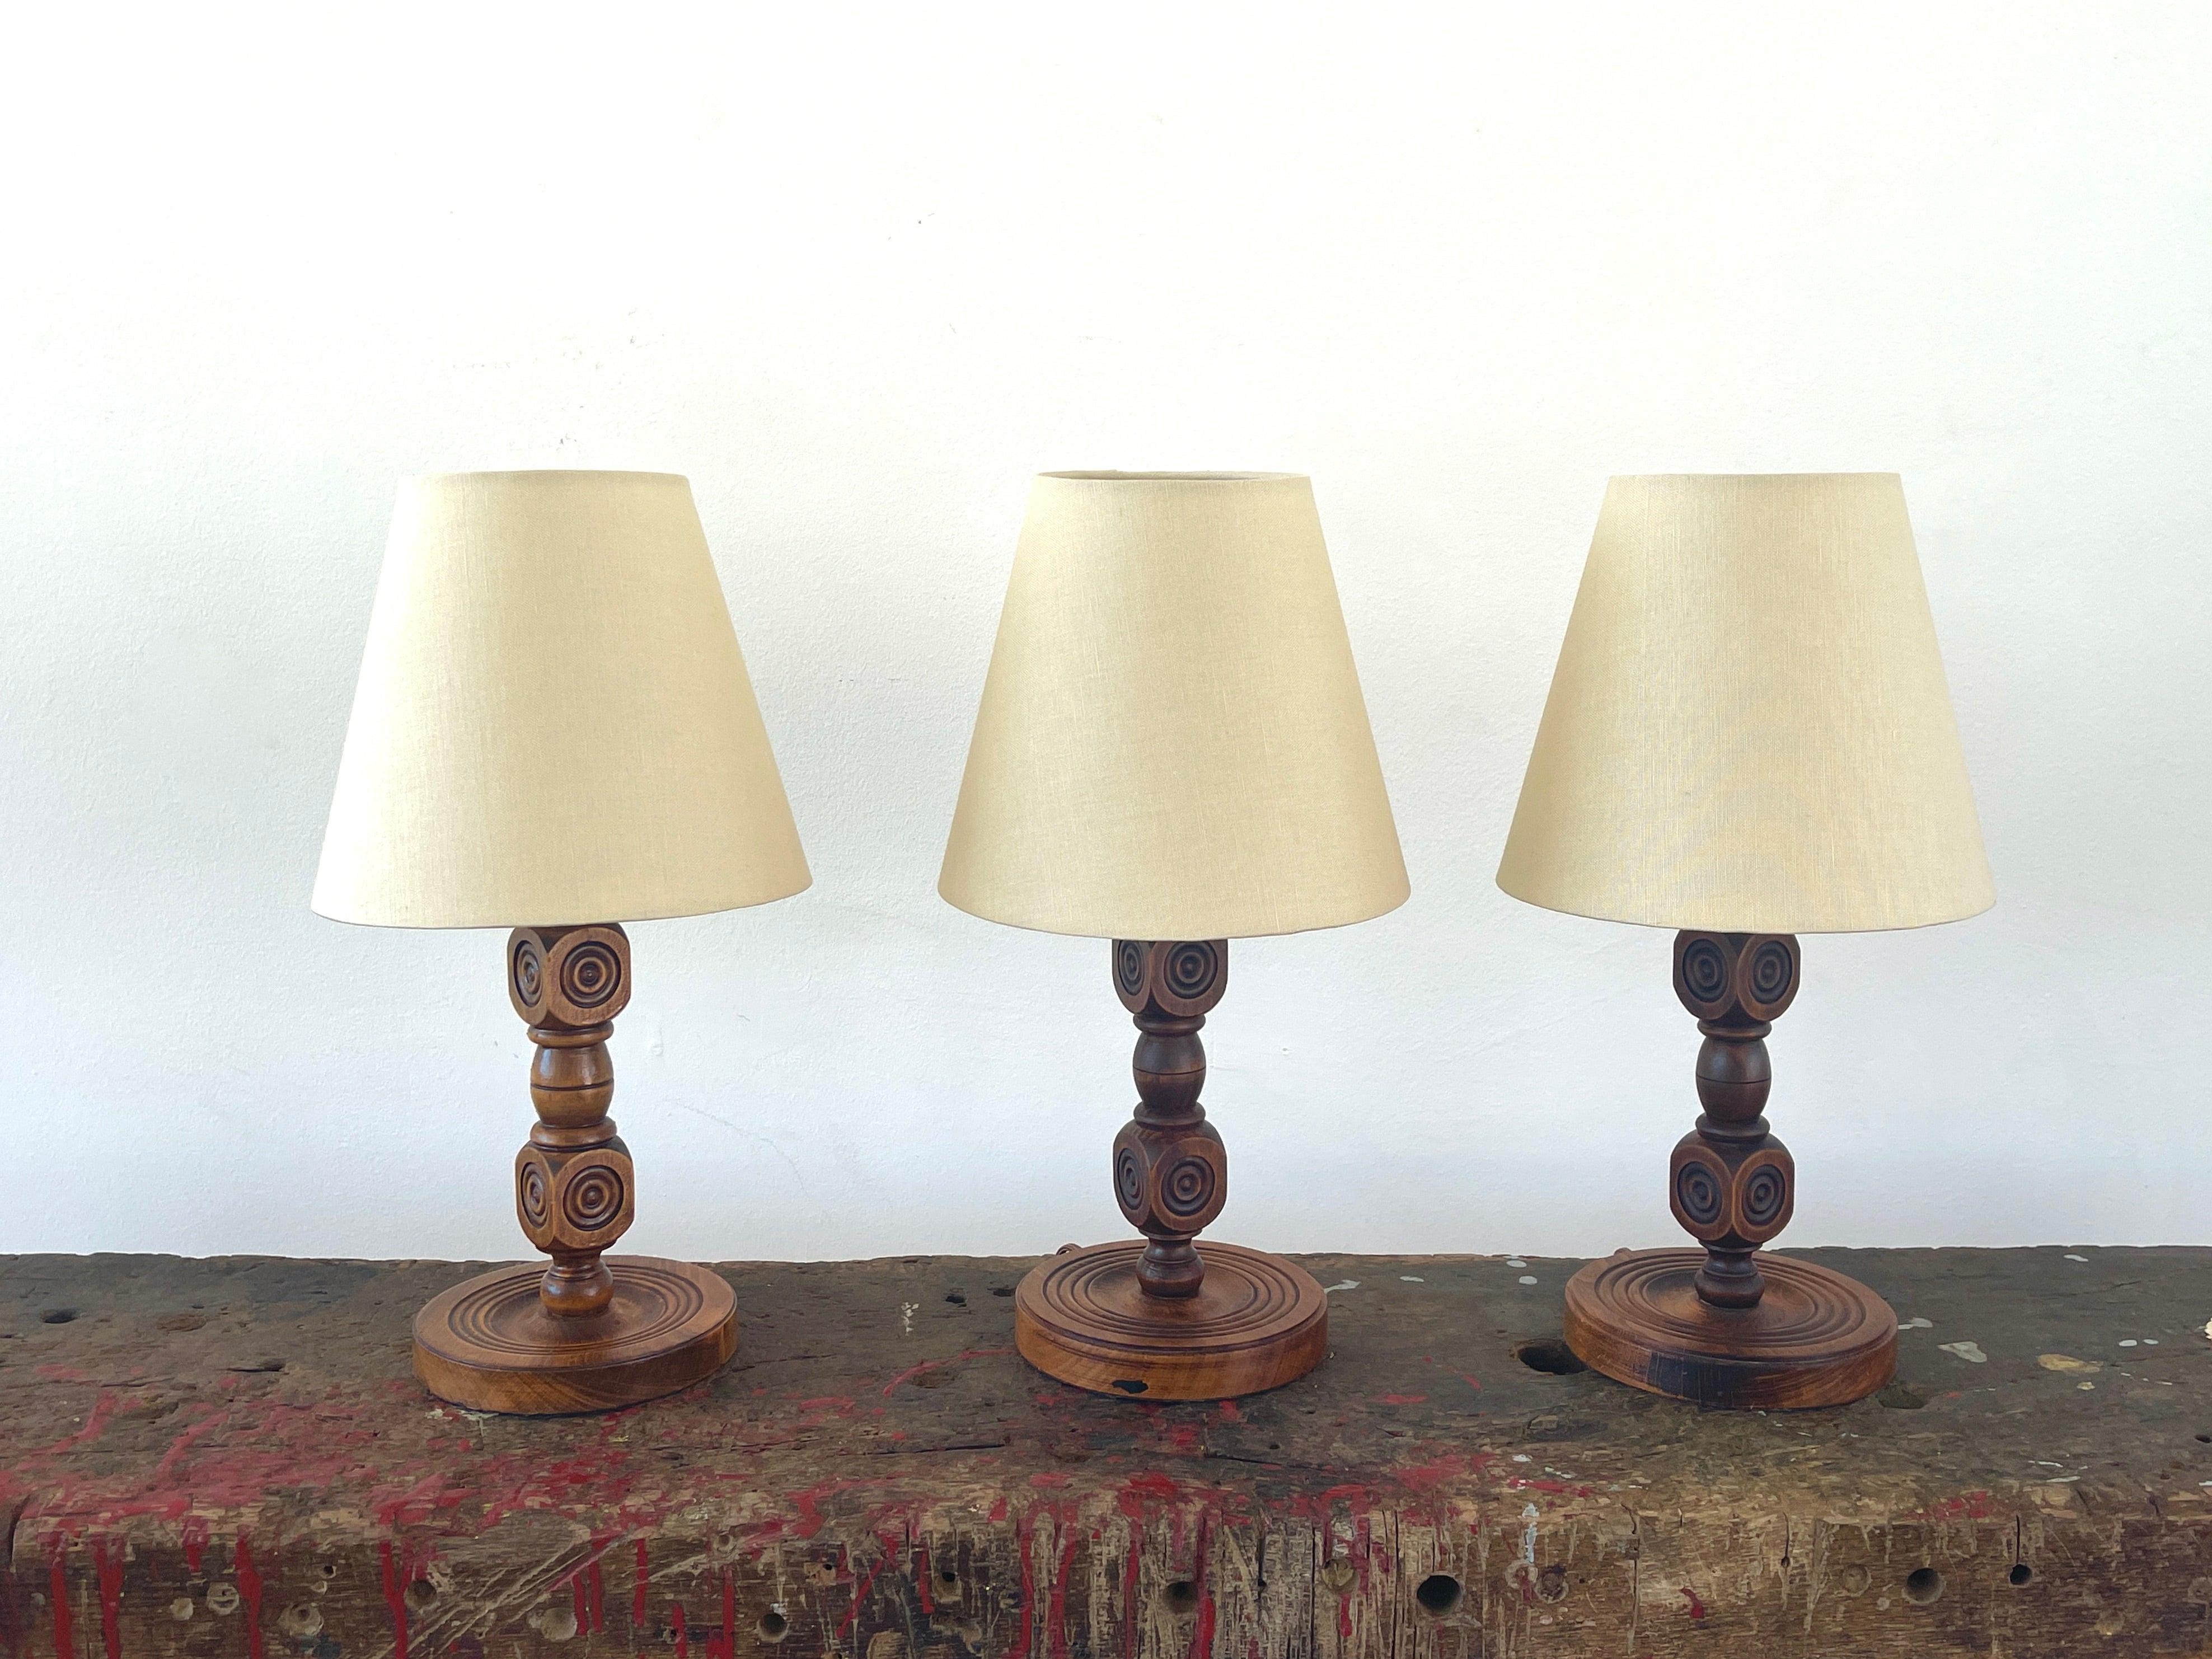 Petite wood carved wood table lamp from France, 1940's by Charles Dudouyt. Beautiful carved wood with great patina. 
New linen shade.
Three available, sold individually.